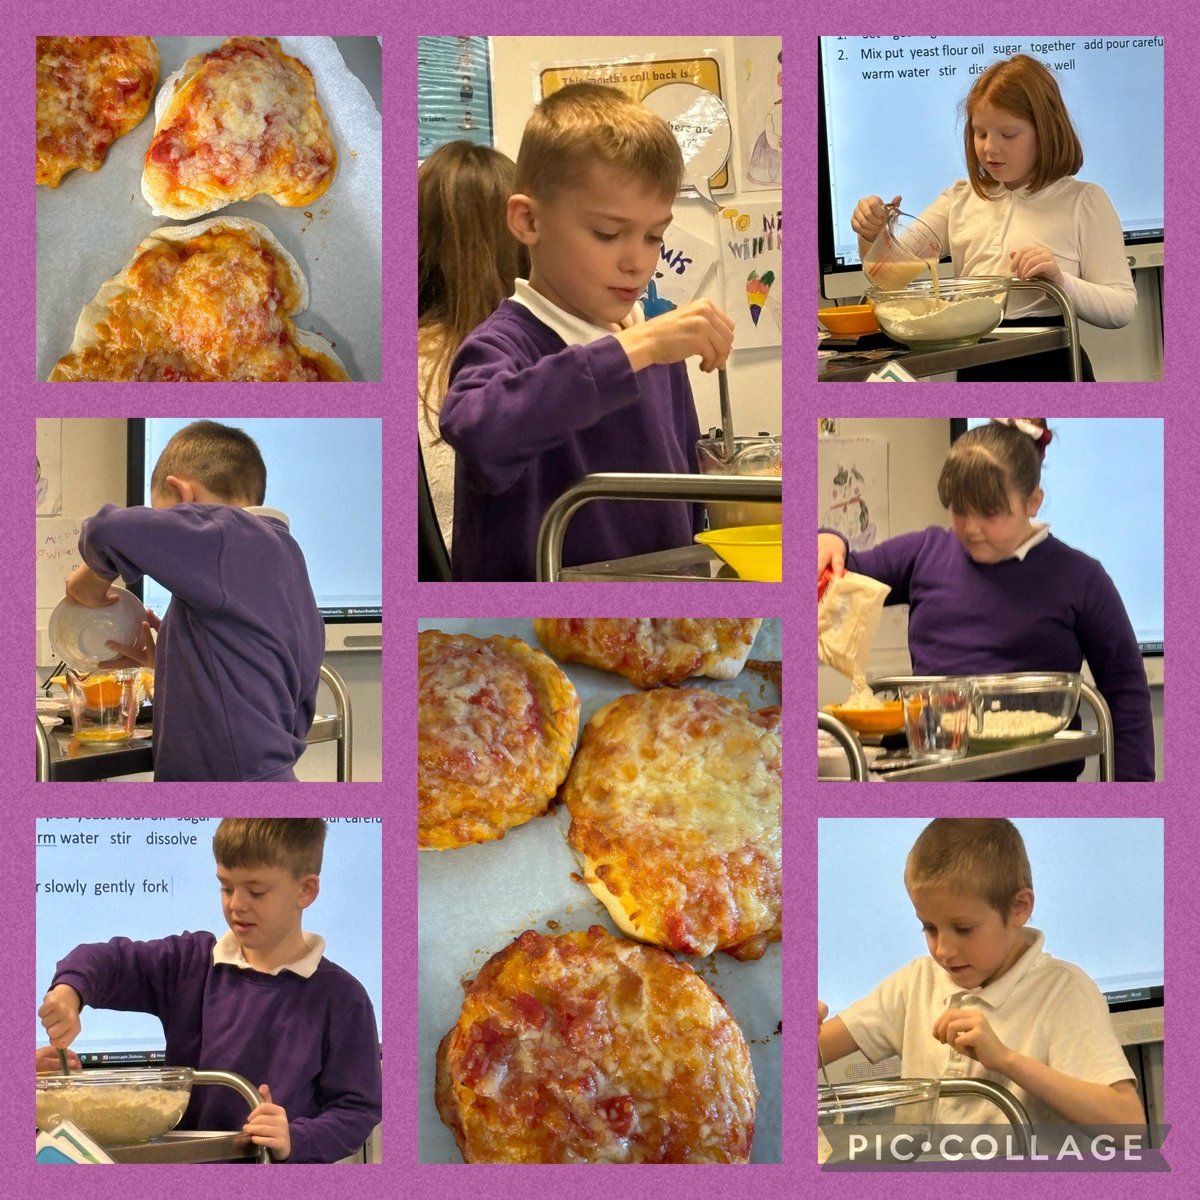 In Y3, we have been learning how to write our own instructions by looking at different recipes. Once we wrote our instructions, we've had a go at making our own pizzas! What do you think? 😋#BusyBeingBrilliant 
@WellspringAT